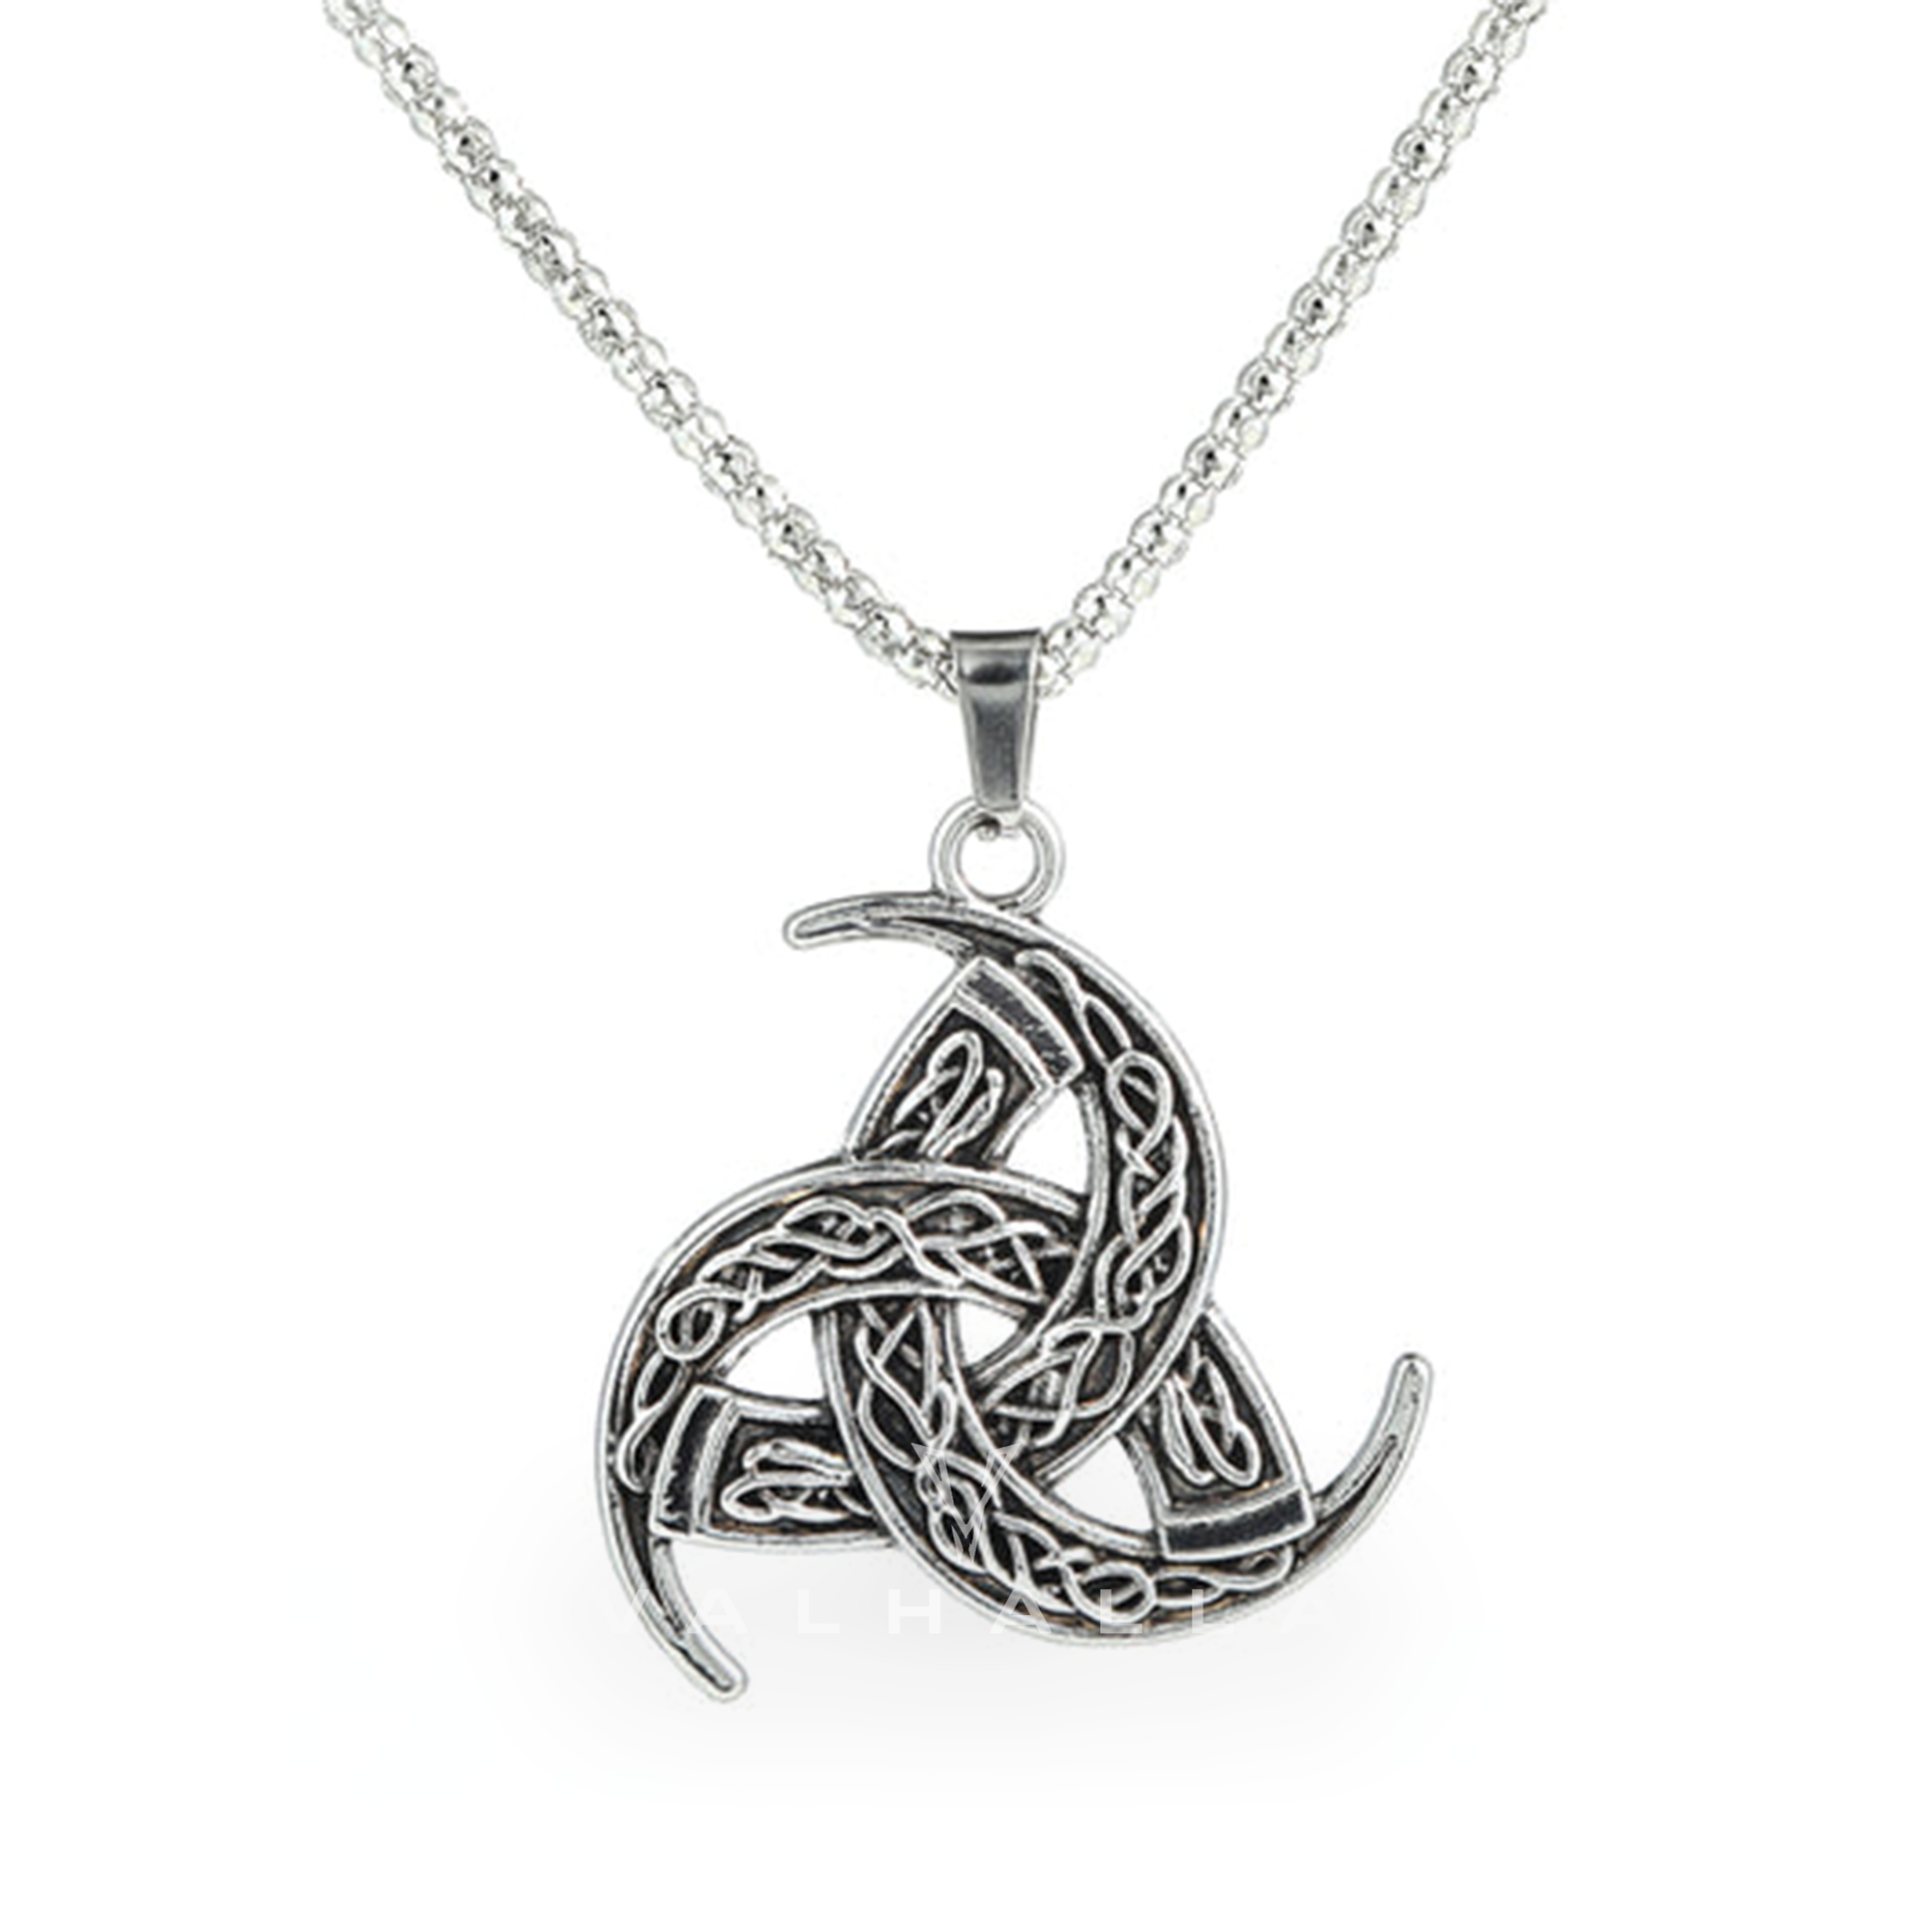 Handcrafted Odin's Horn Pendant & Chain